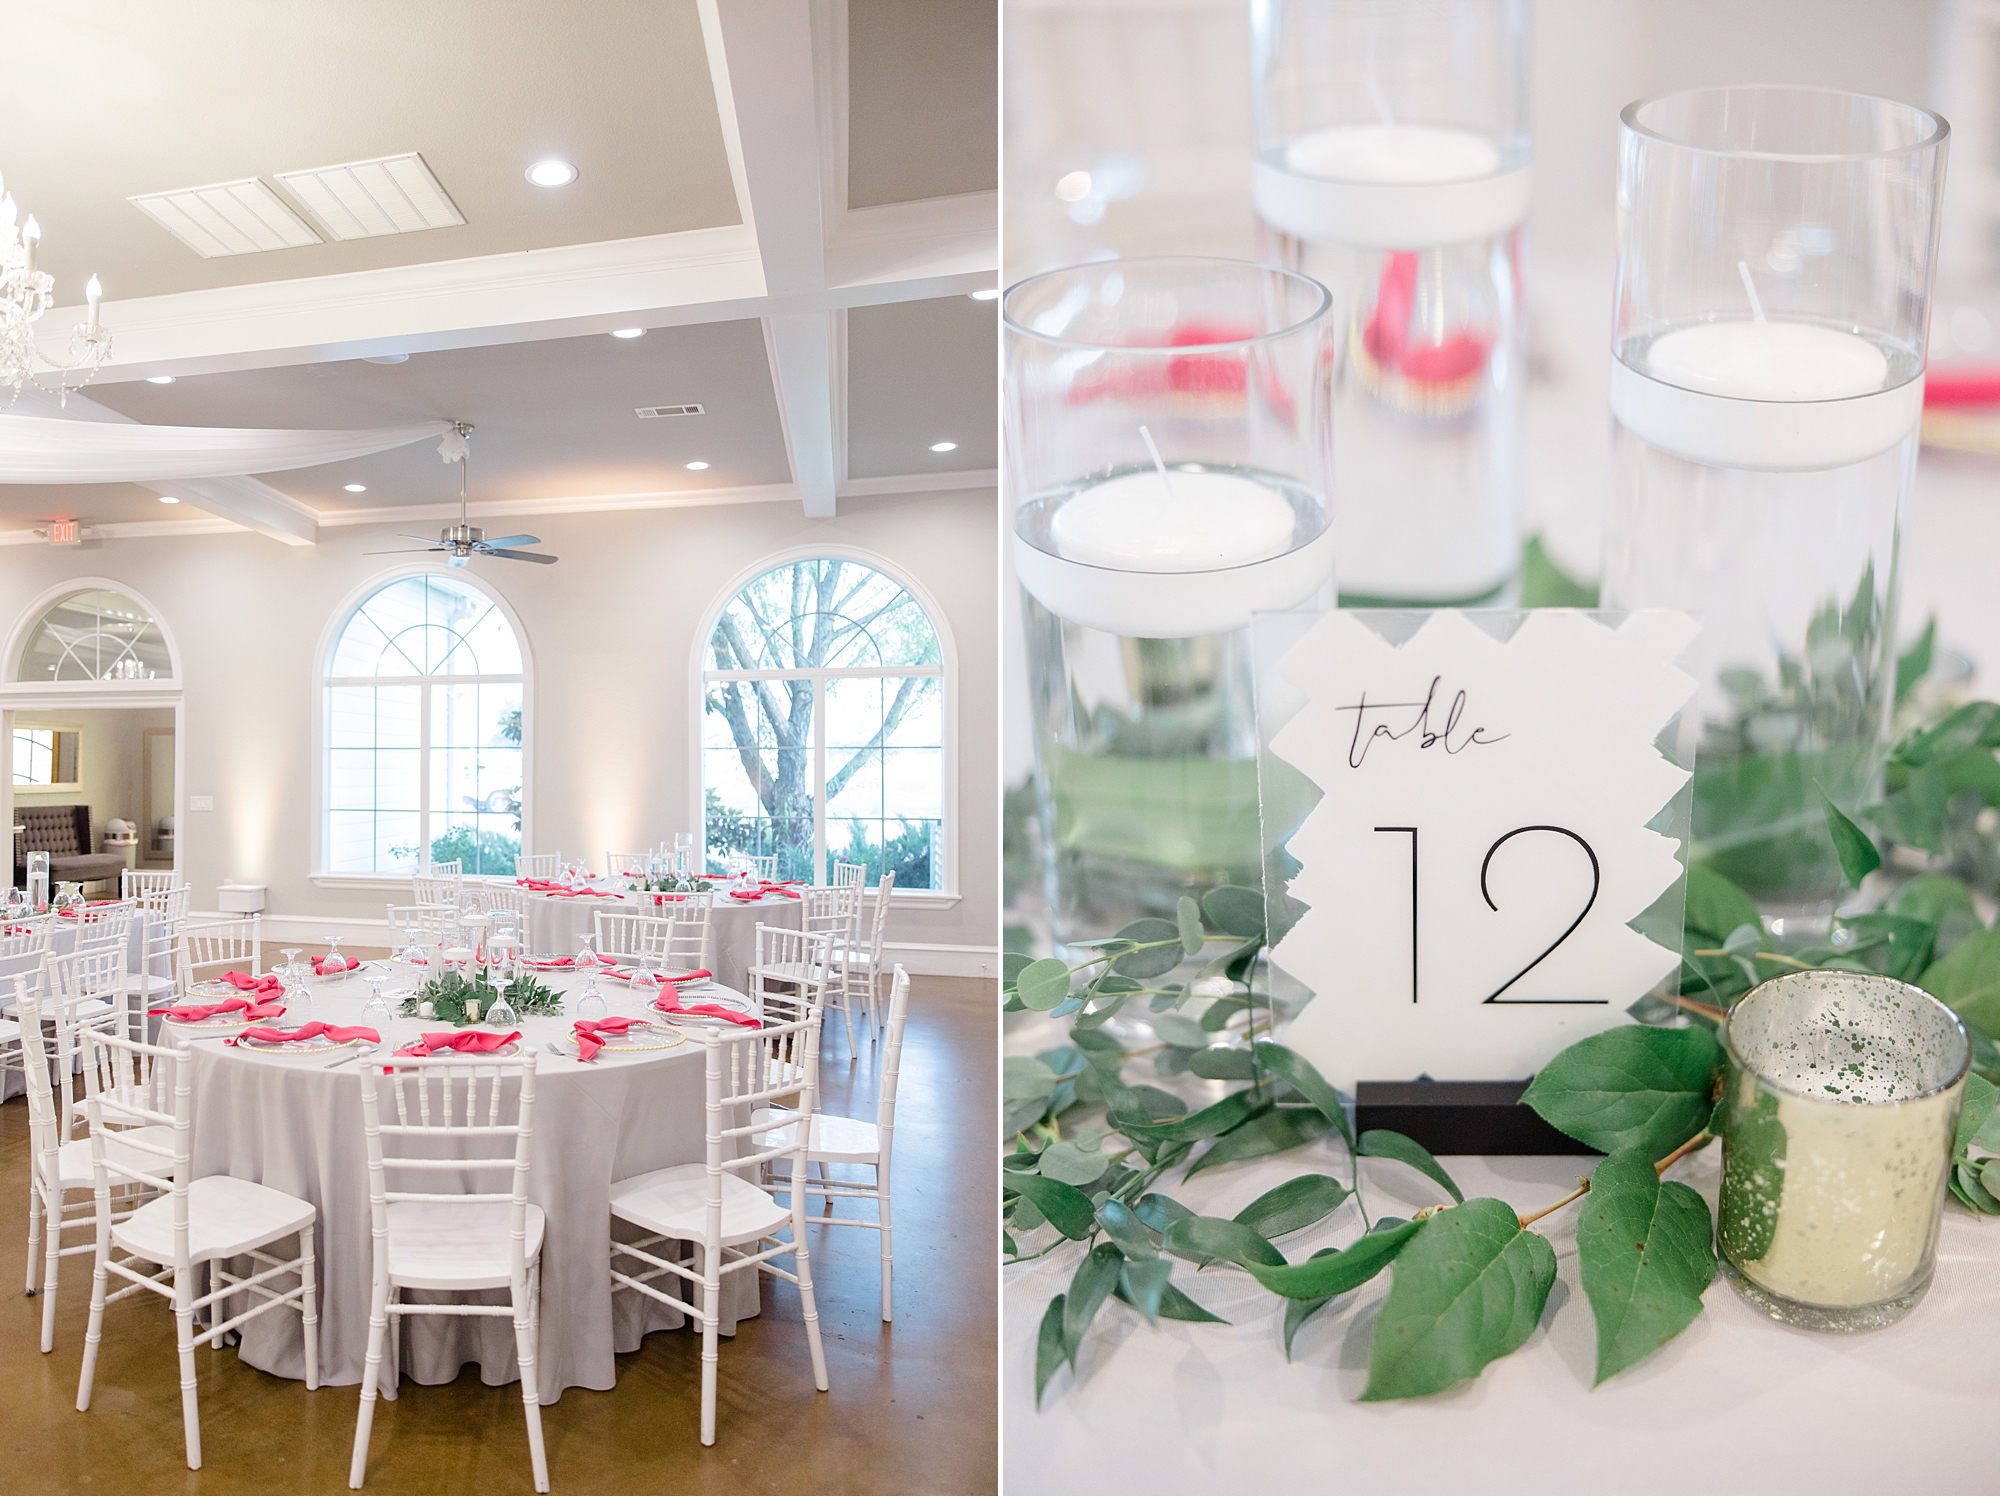 Willow Creek wedding reception table numbers with greenery and gold candles